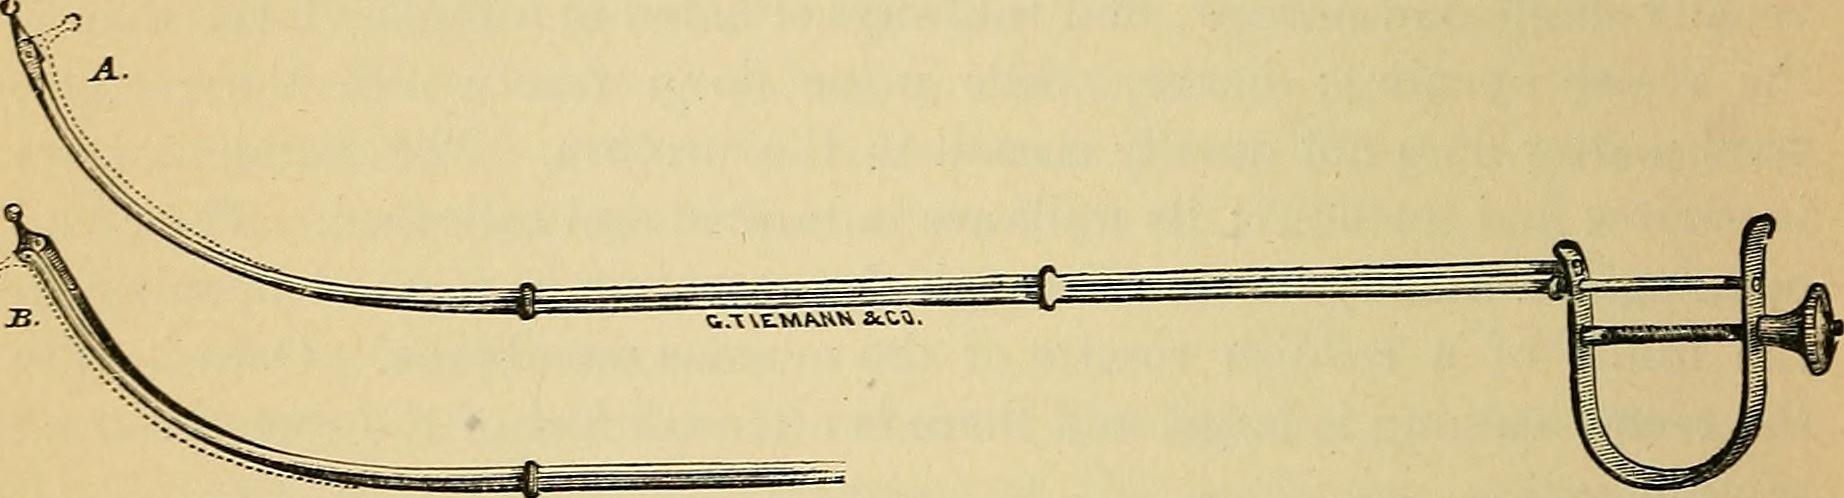 Diagram of Ben Franklin's Urinary Catheter Invention